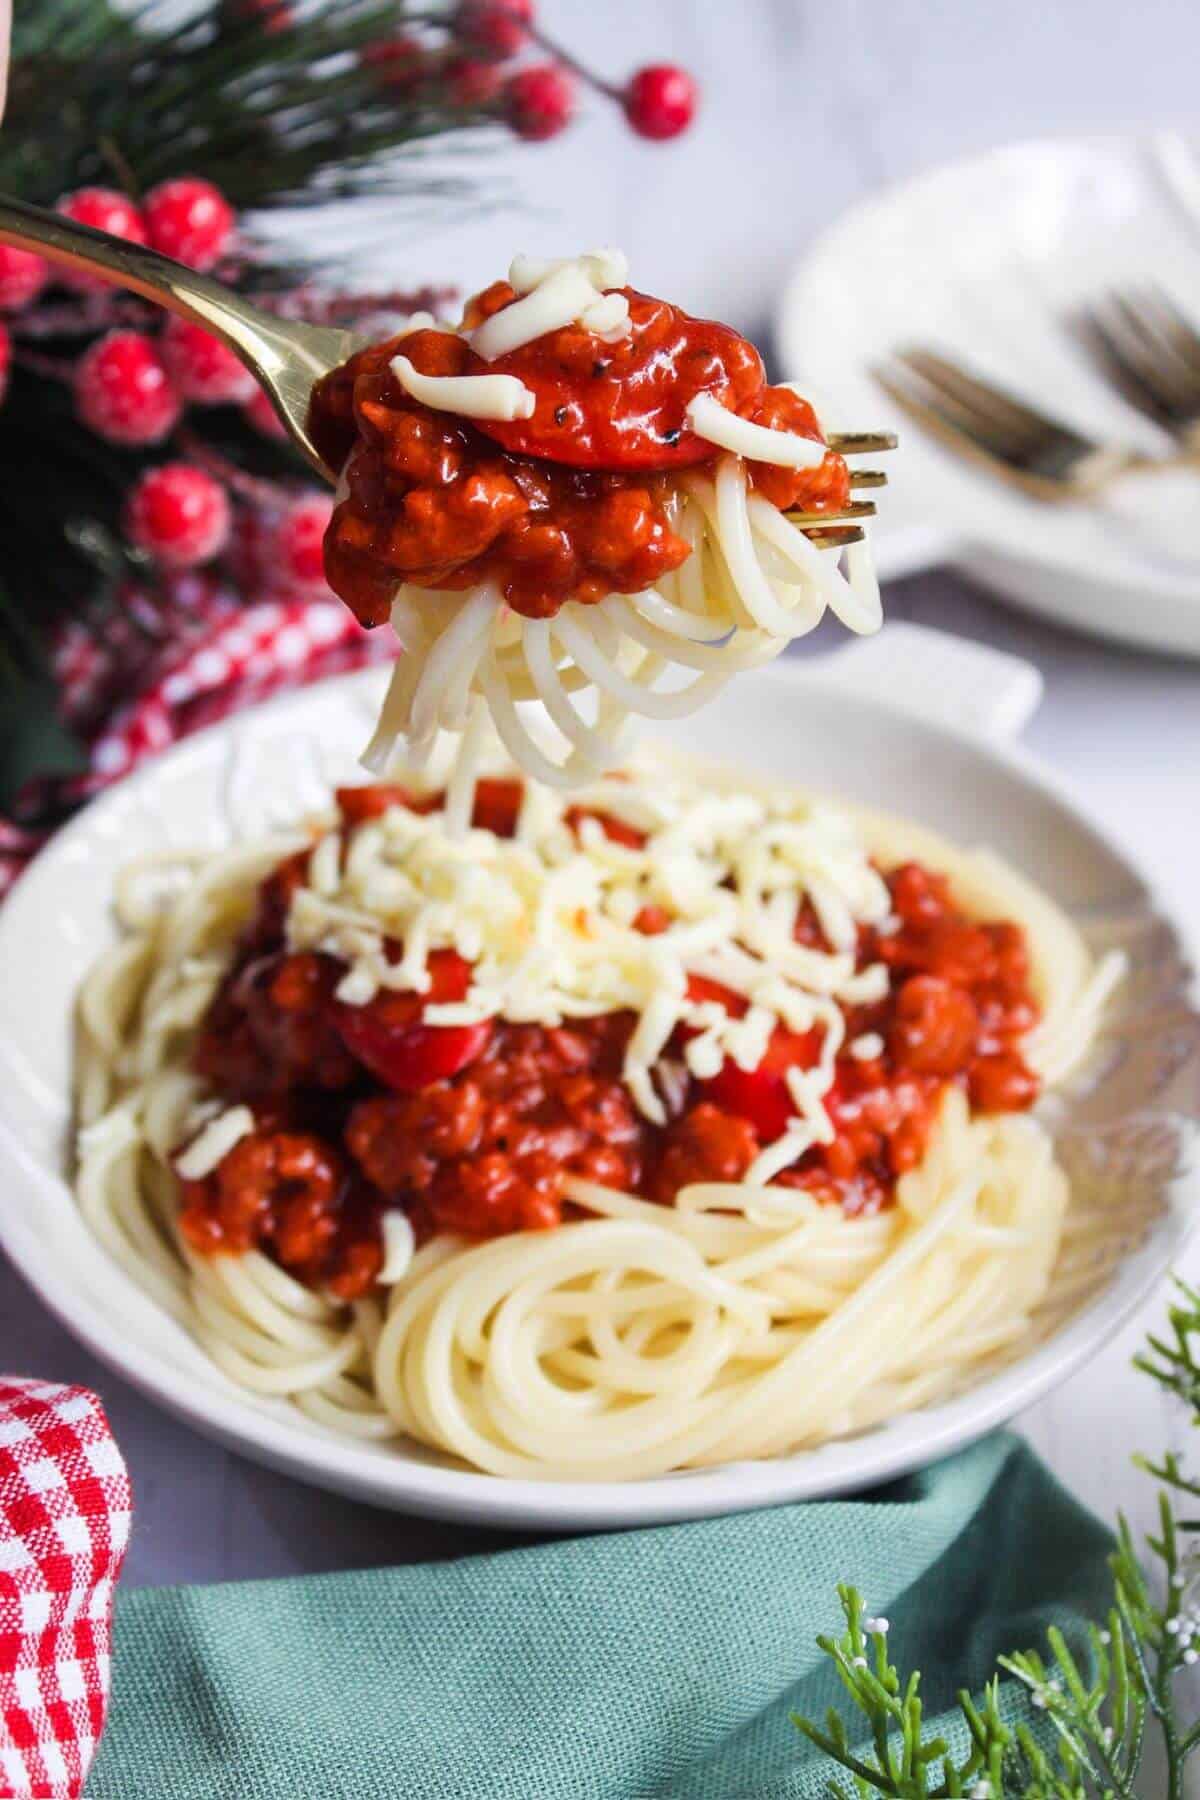 Spaghetti with meat sauce and cheese on a plate.